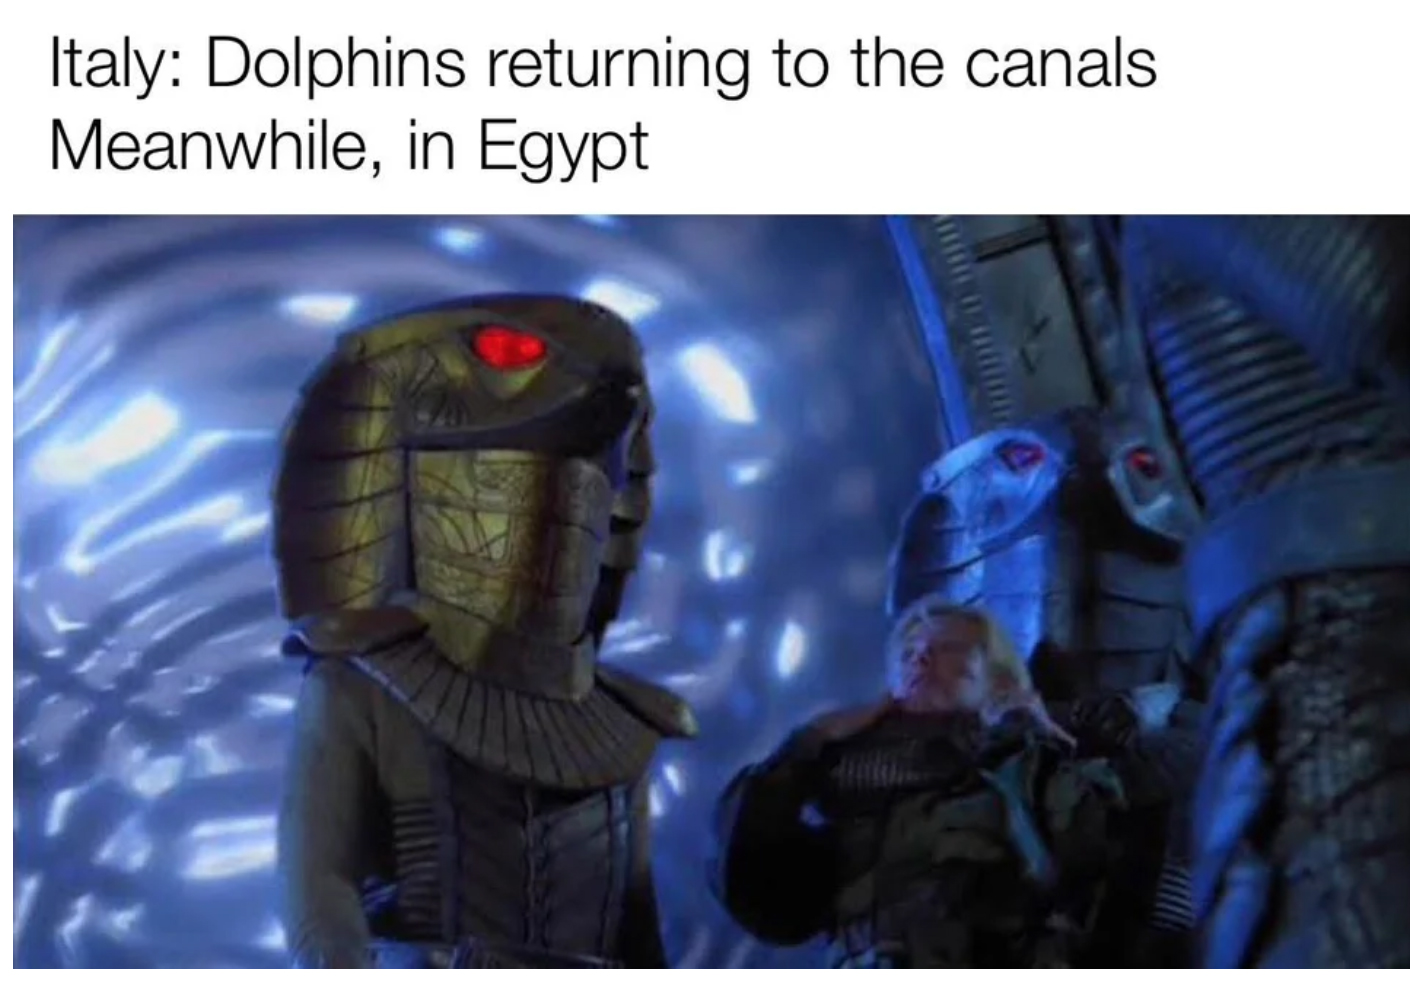 Italy: Dolphins returning to the canals - Meanwhile, in Egypt